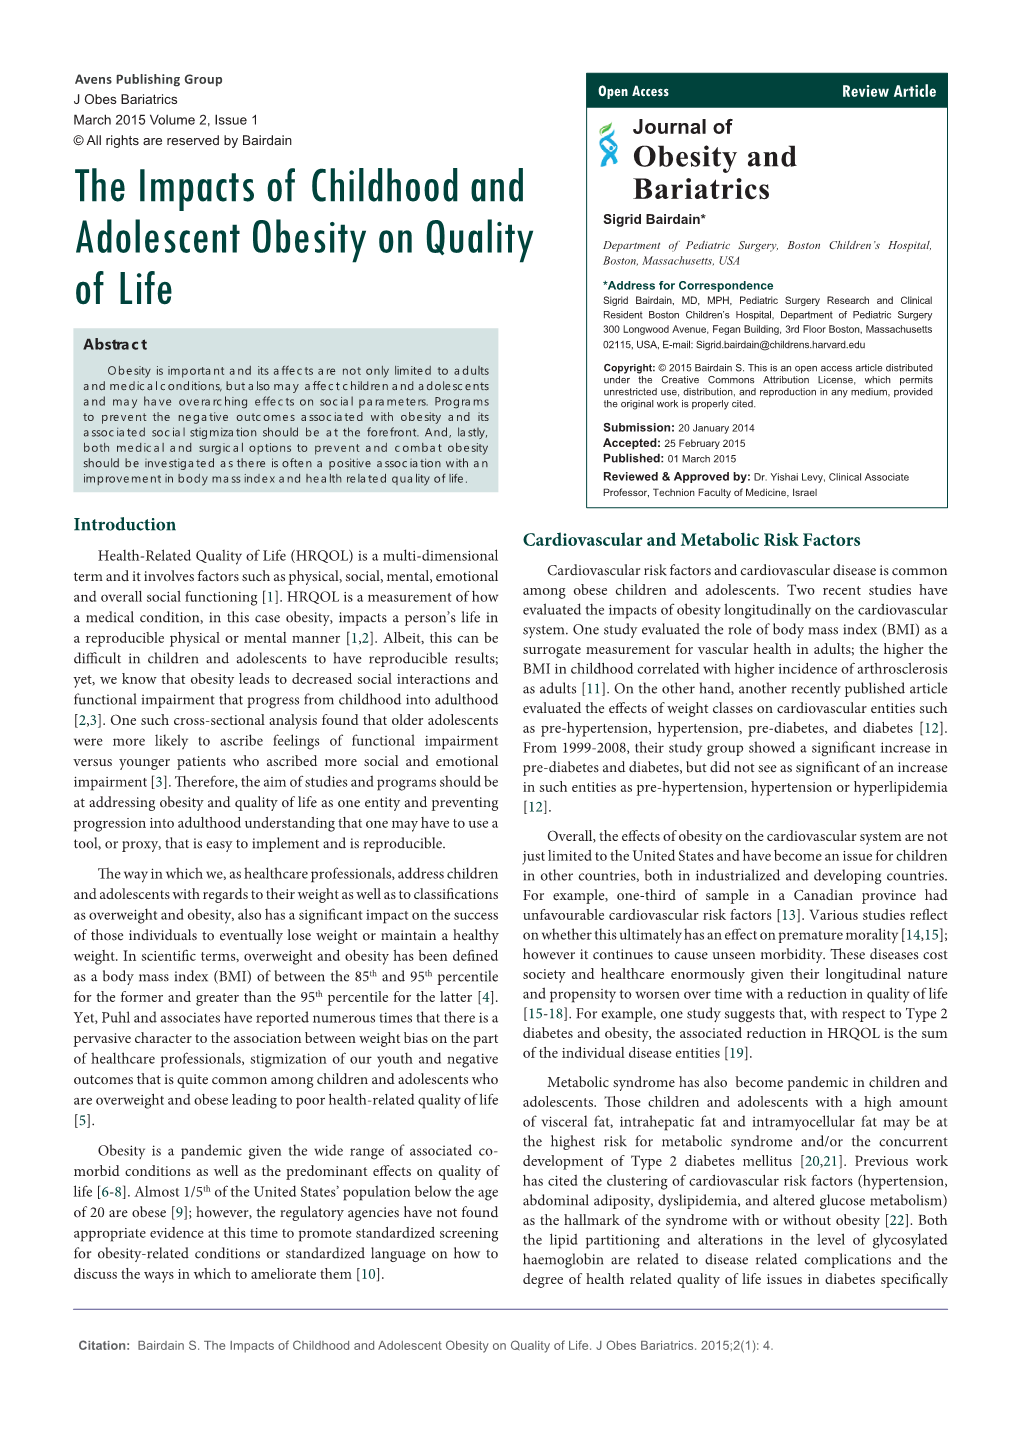 The Impacts of Childhood and Adolescent Obesity on Quality of Life